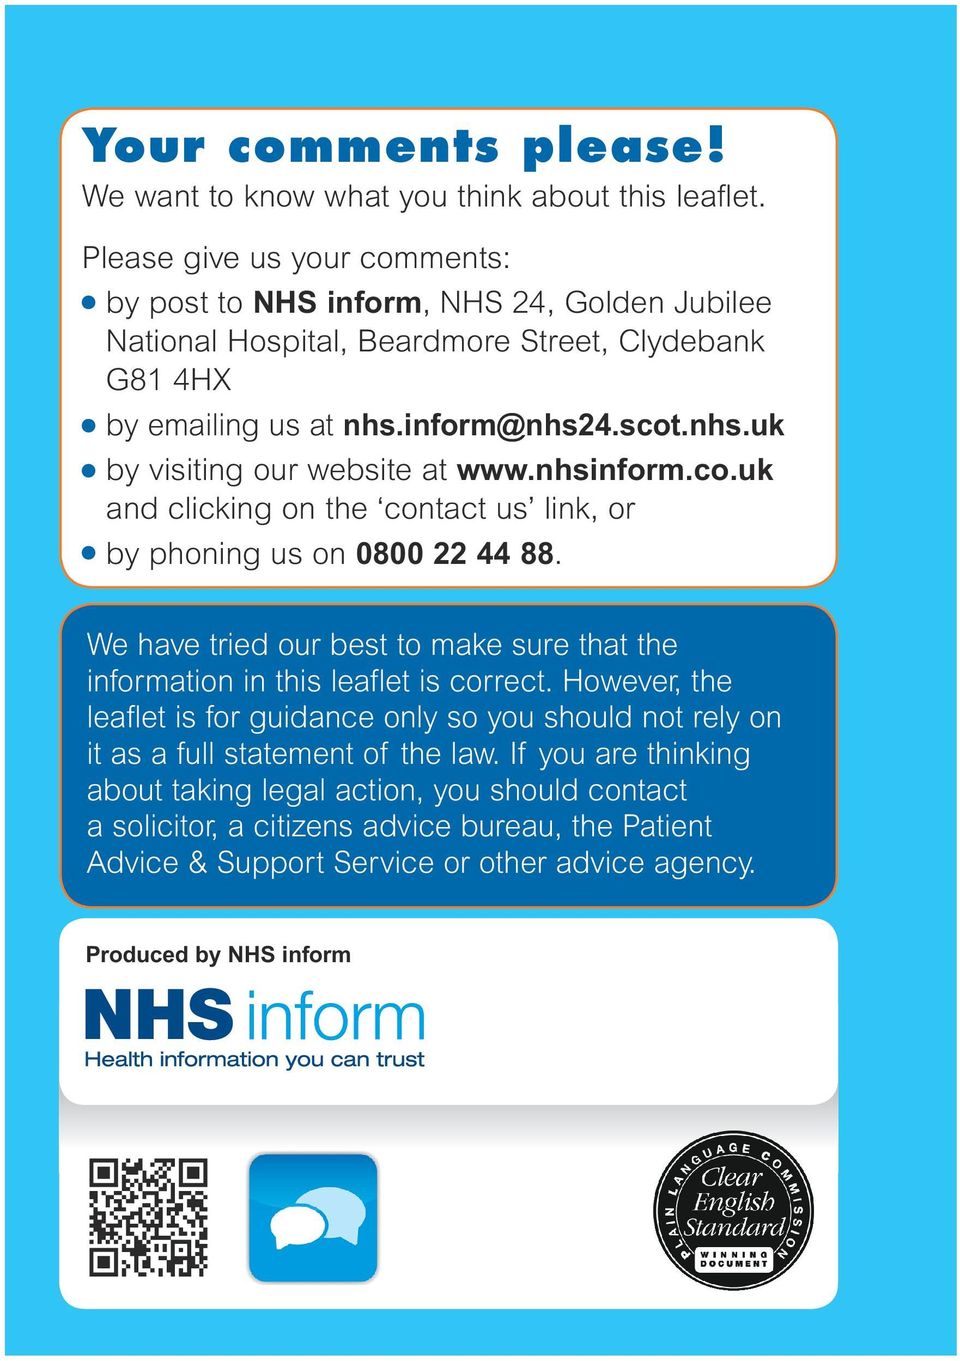 nhsinform.co.uk and clicking on the contact us link, or by phoning us on 0800 22 44 88. We have tried our best to make sure that the information in this leaflet is correct.